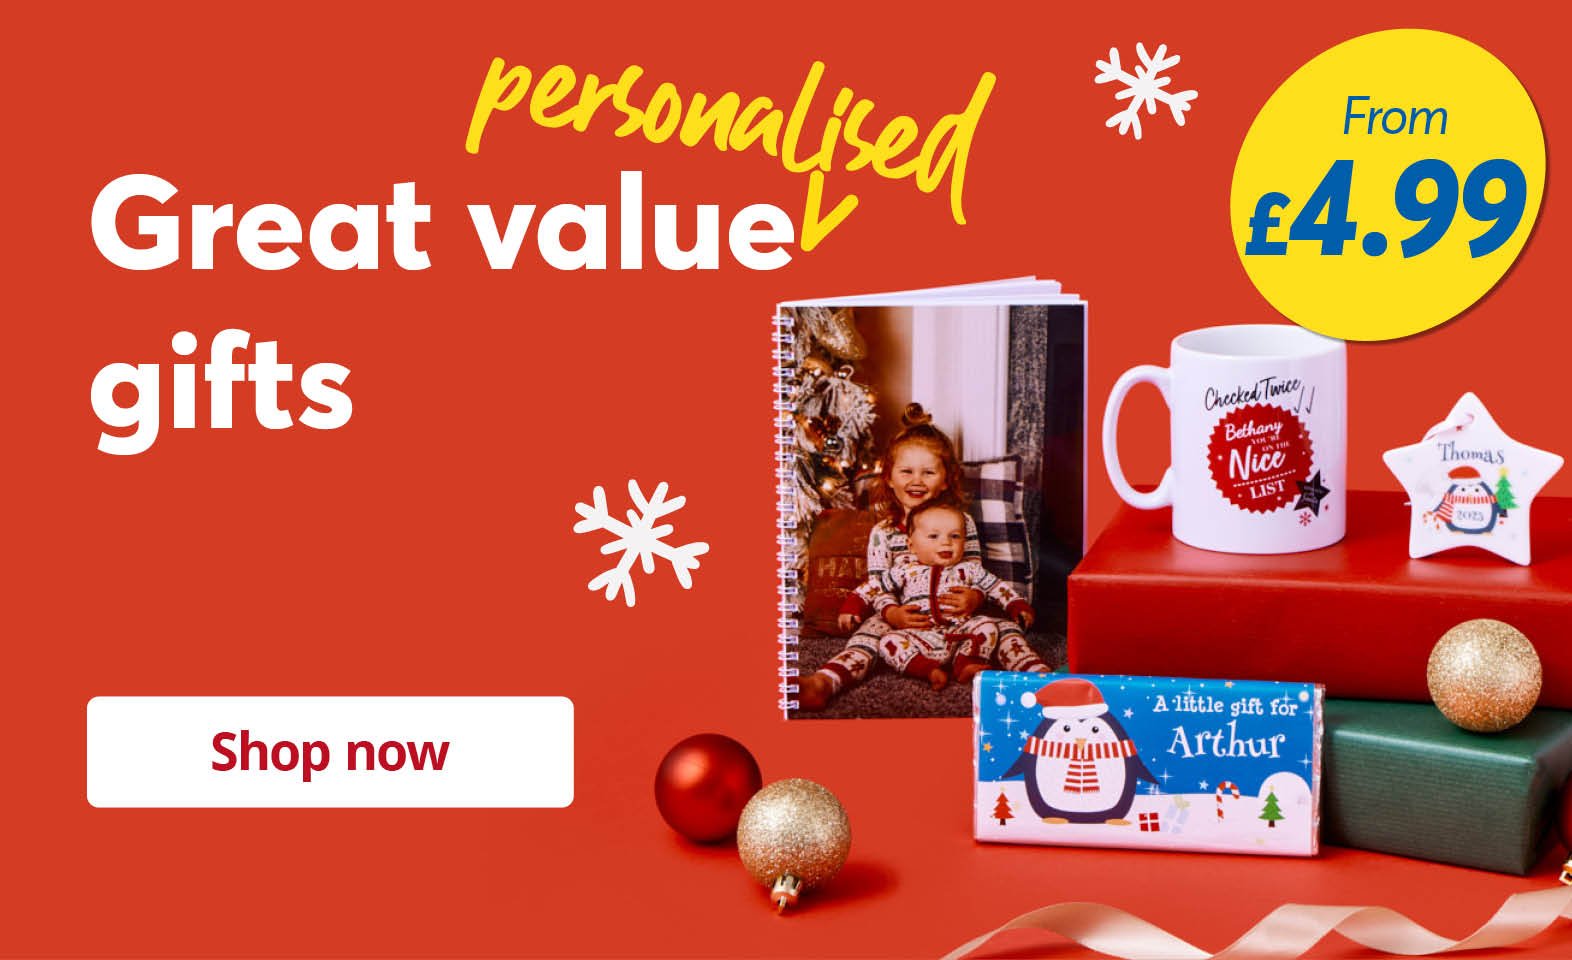 Value personalised gifts